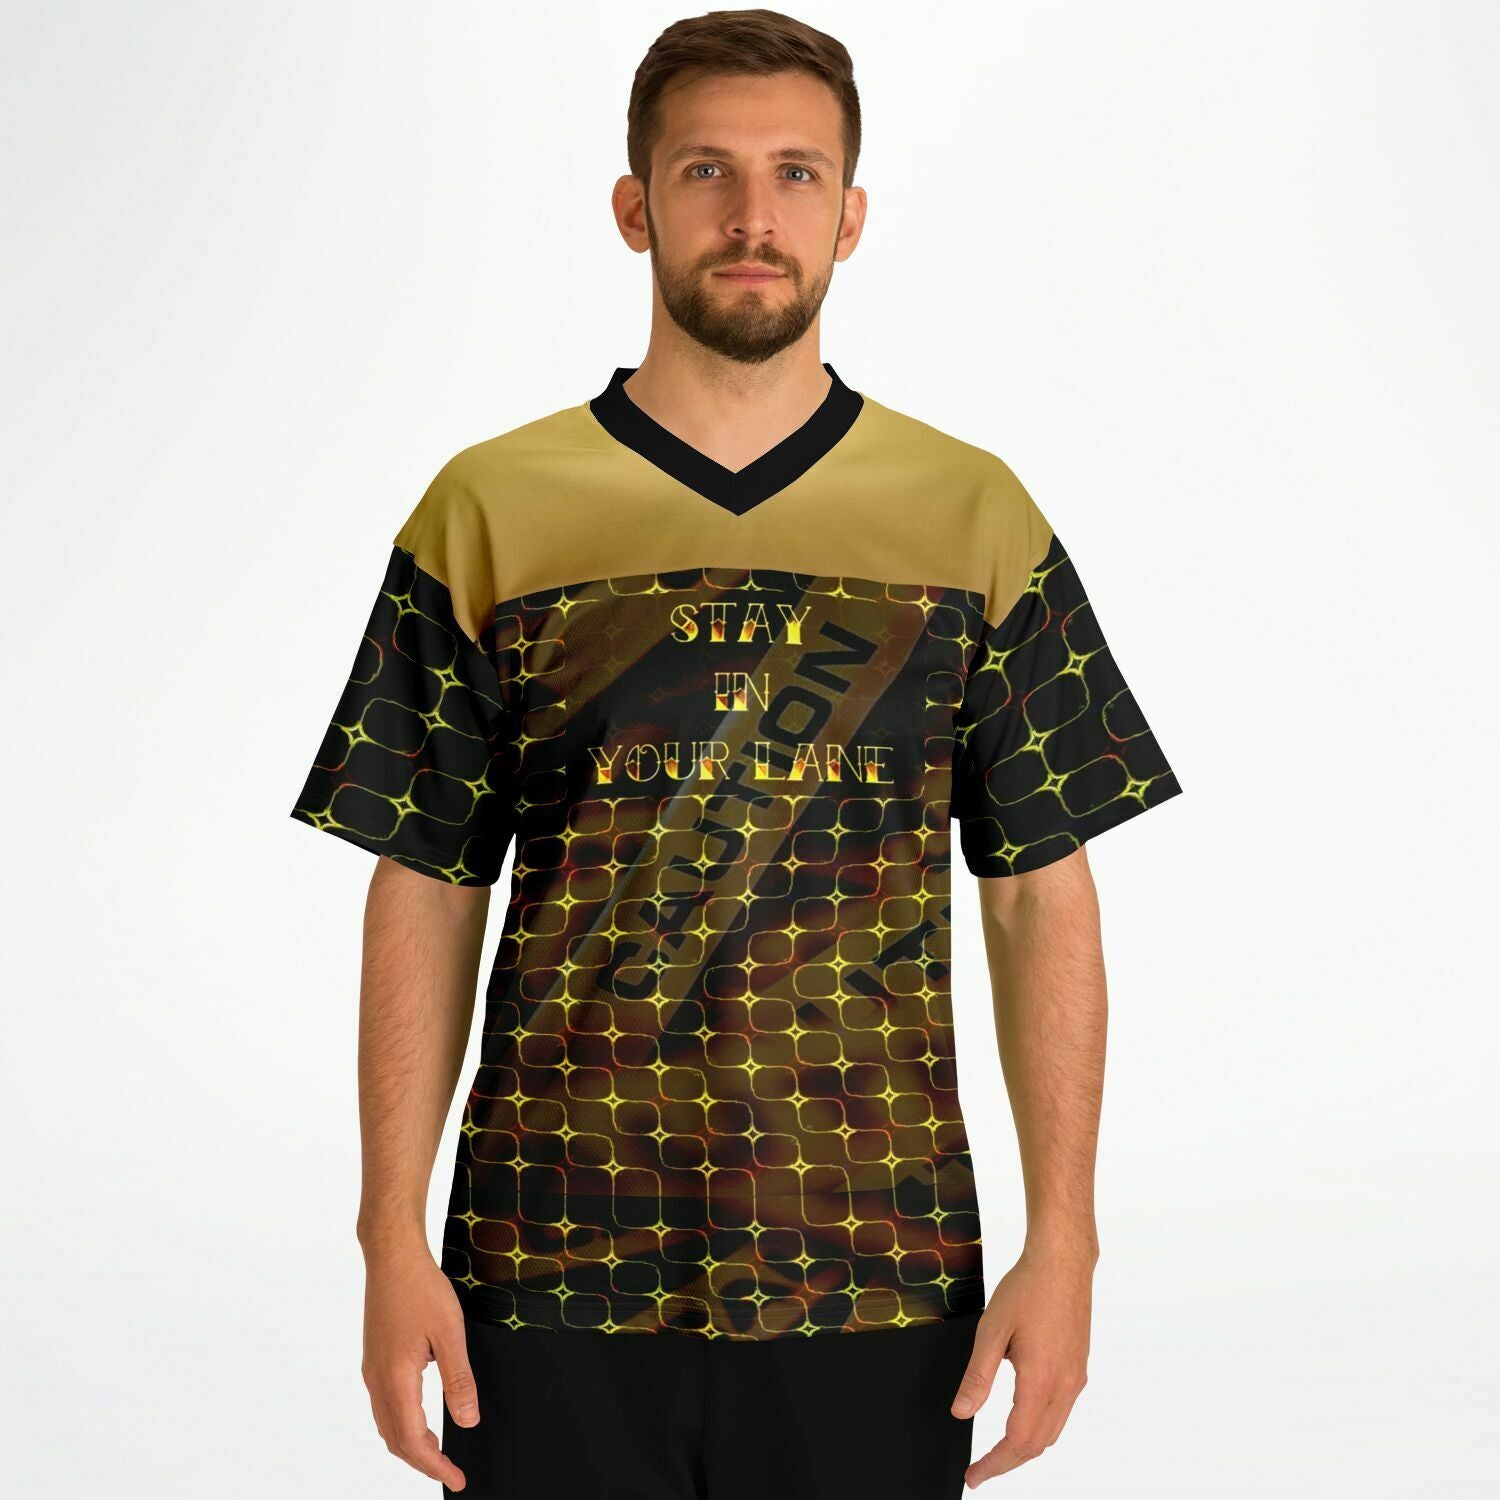 STAY IN YOUR LANE 02-01 Designer Football Jersey